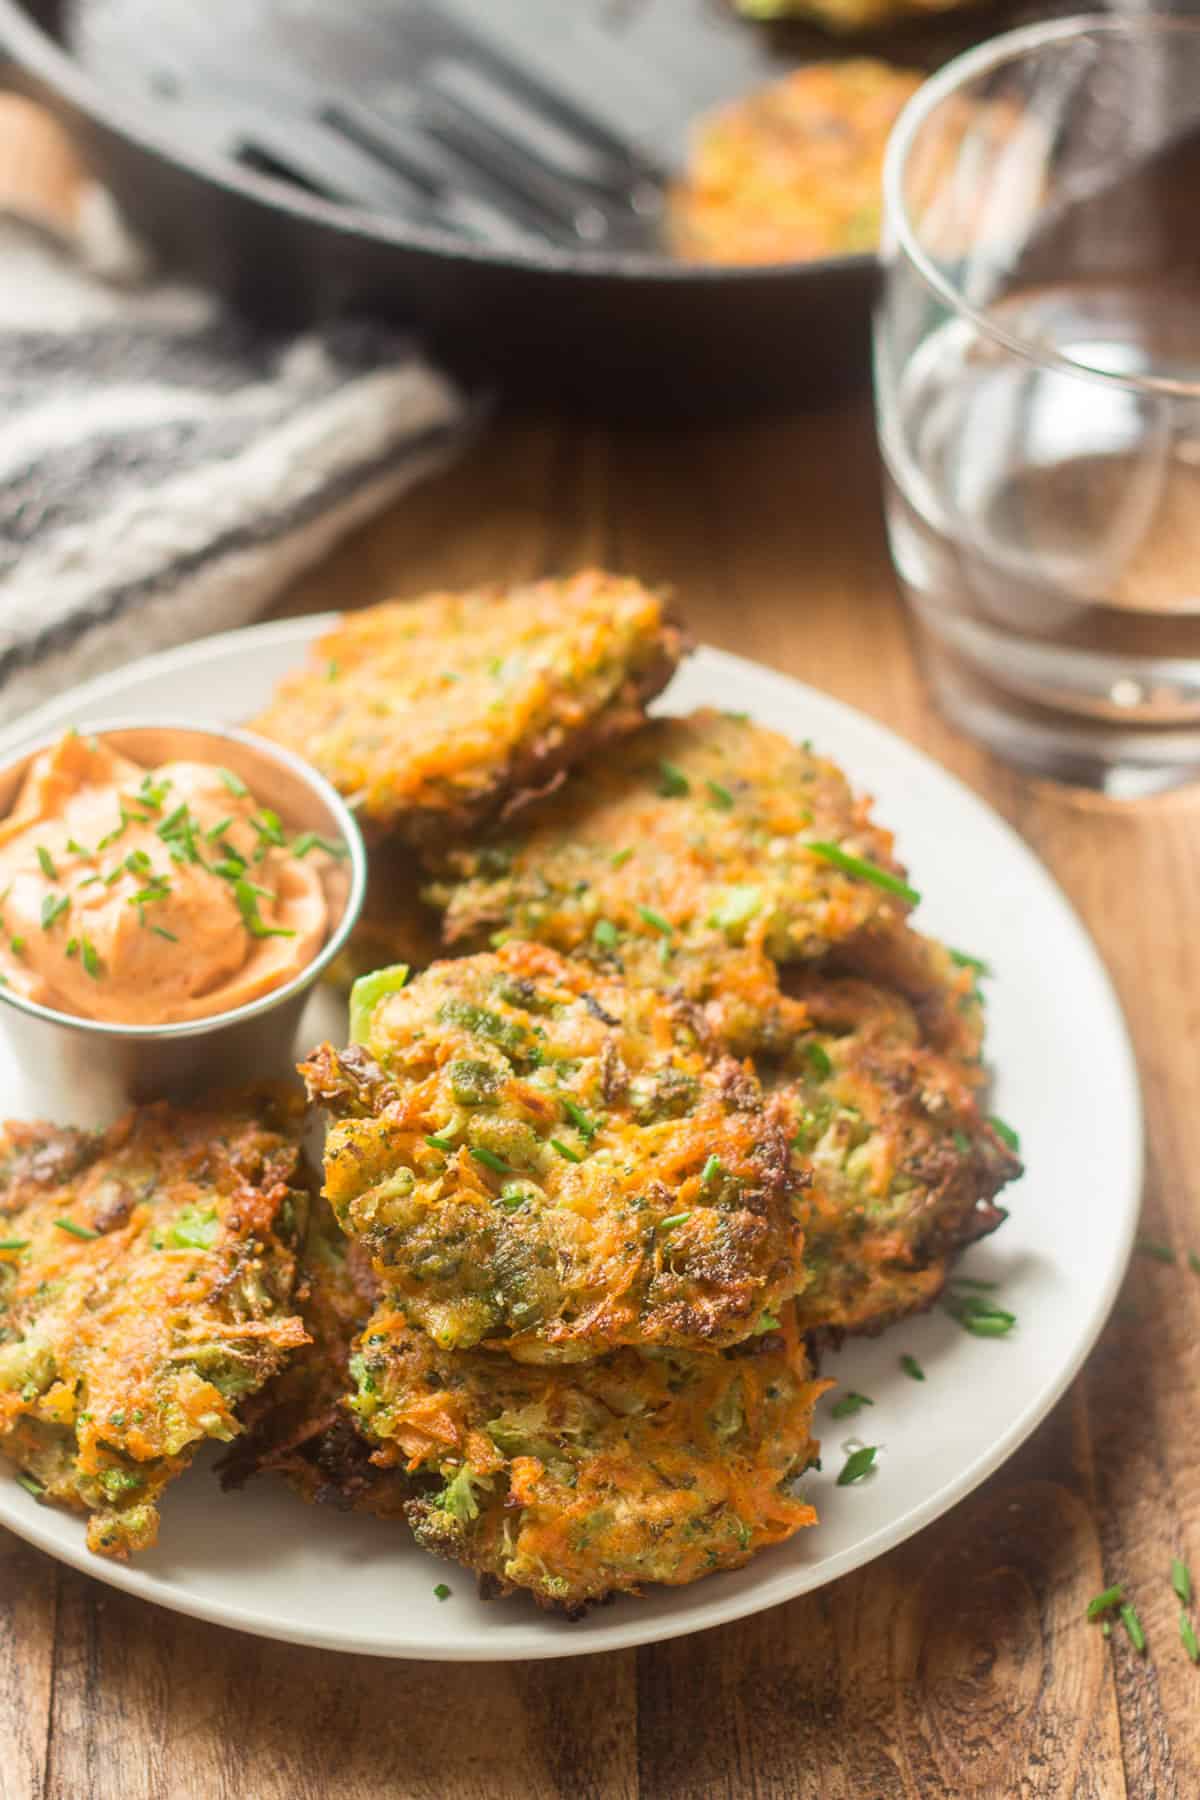 Plate of Vegetable Fritters with water glass and skillet in the background.